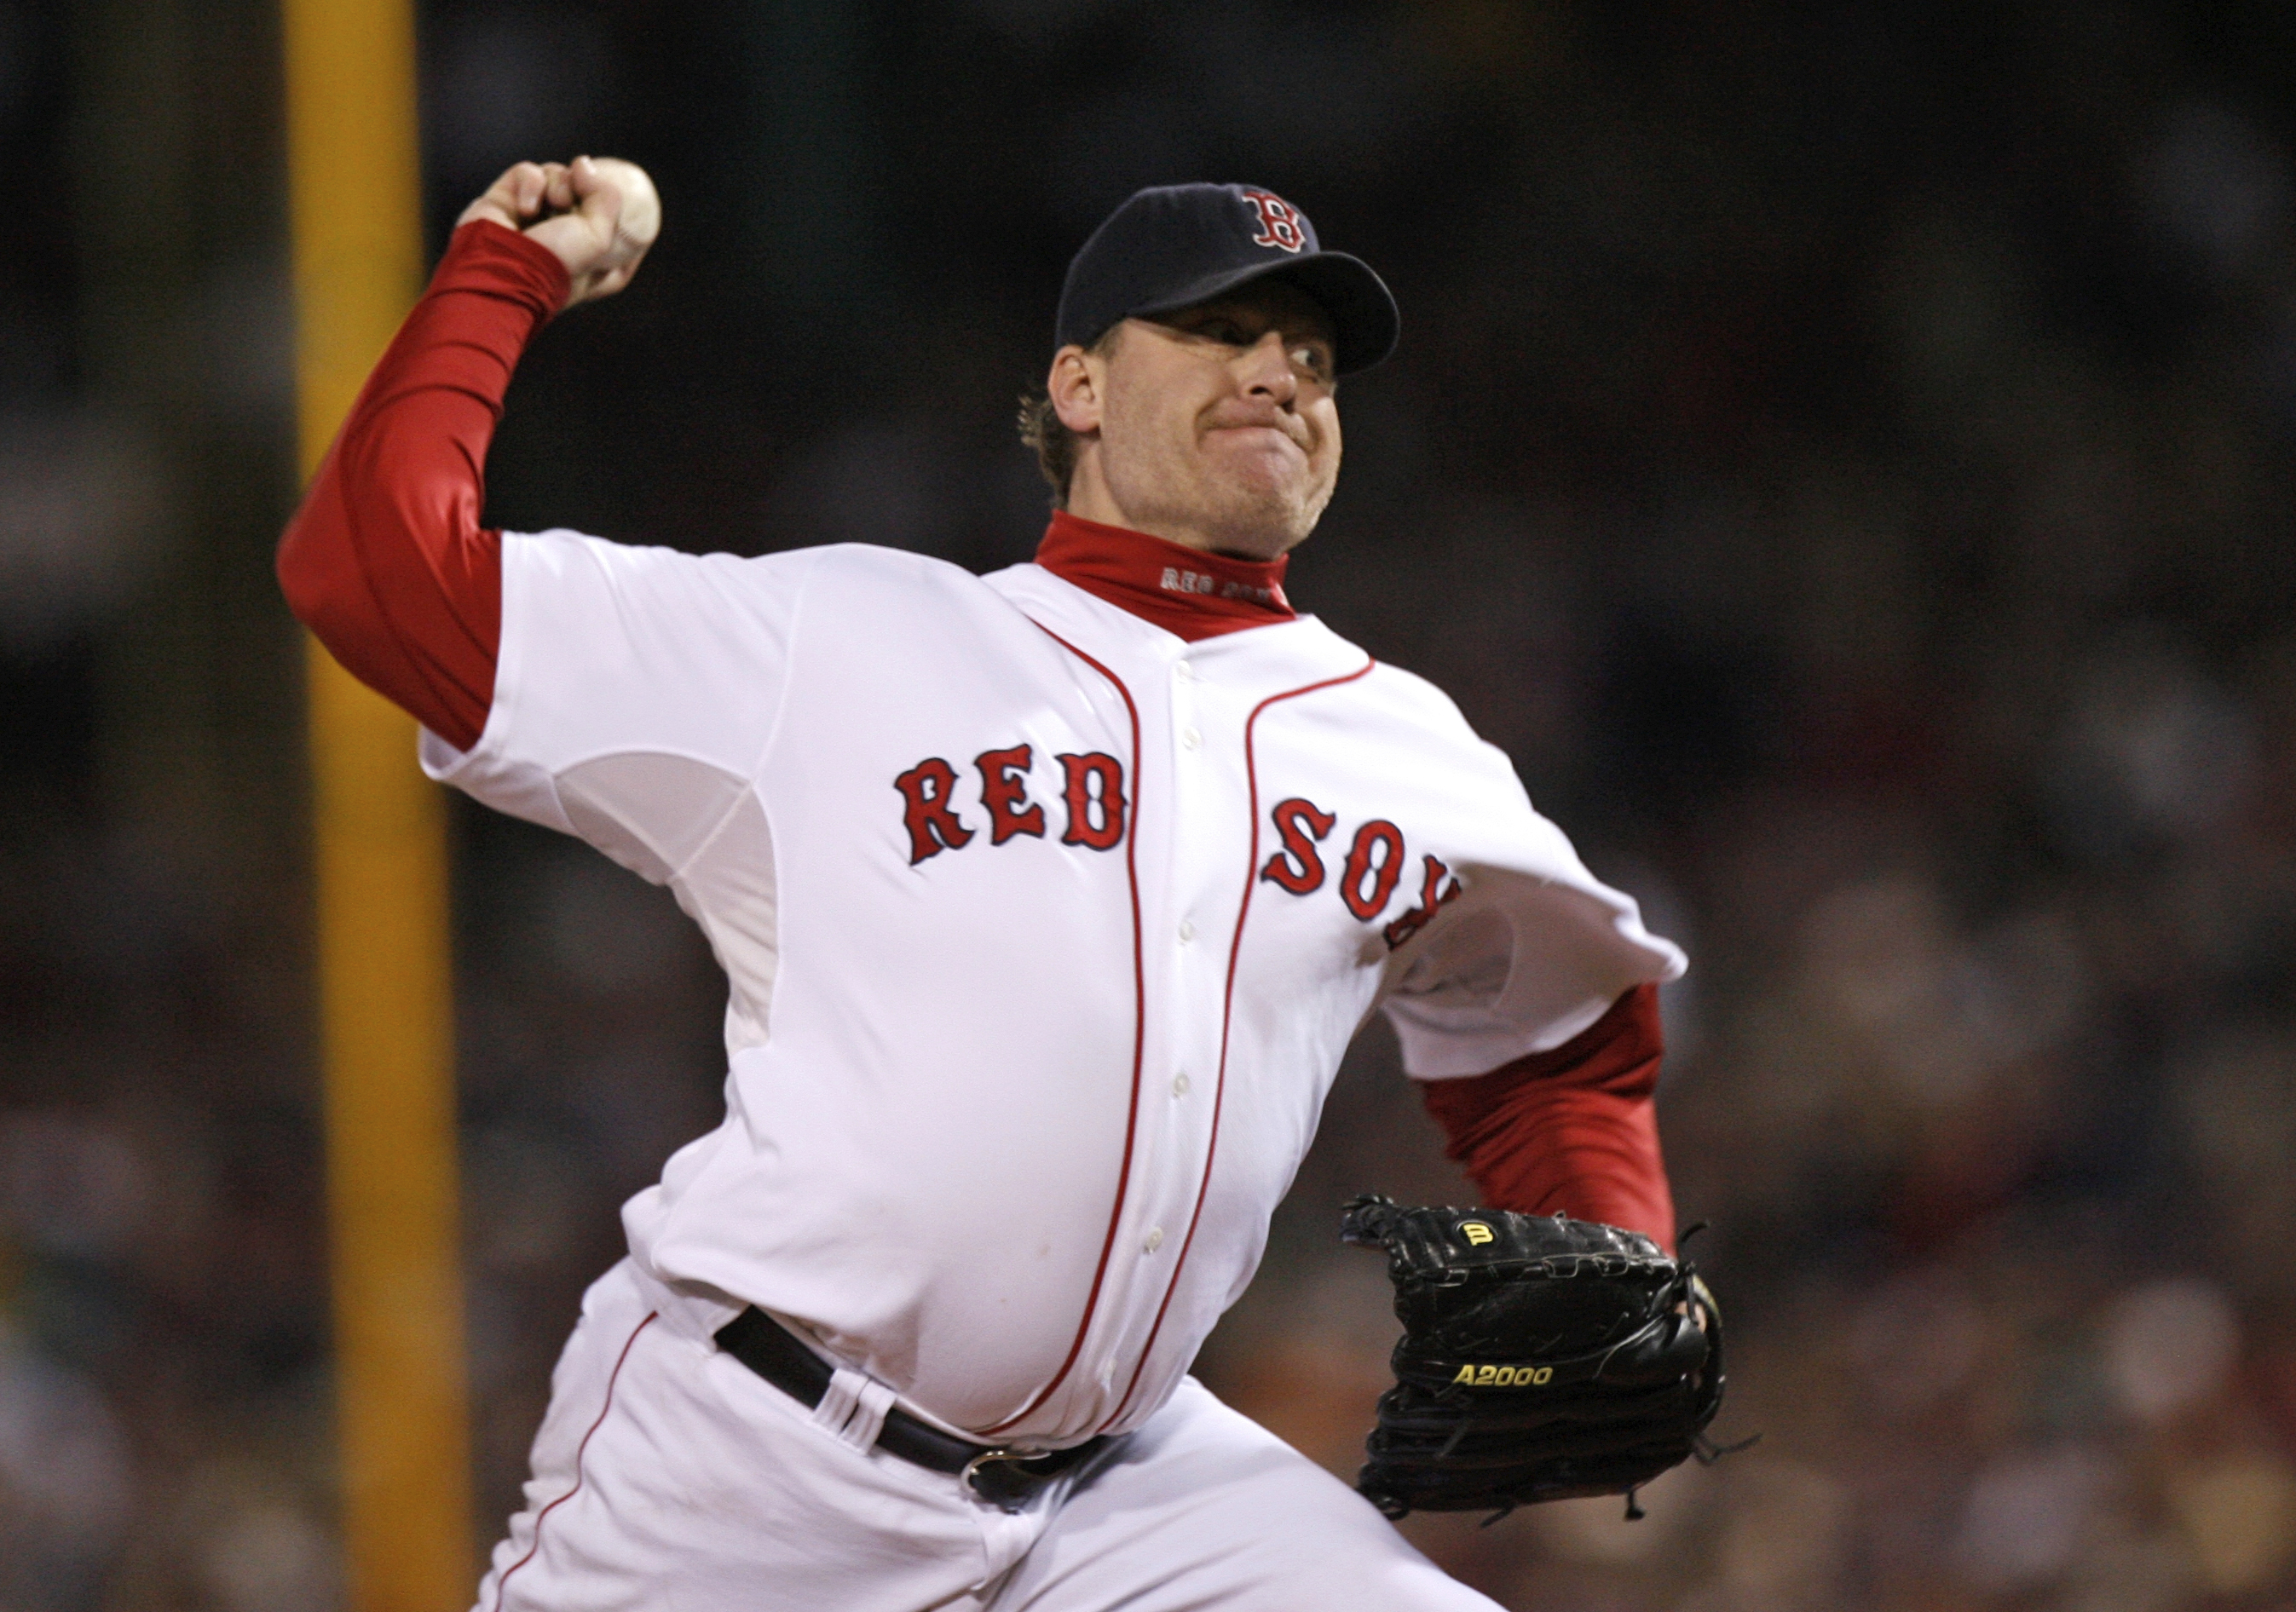 Curt Schilling doesn't make Baseball Hall of Fame in final year on ballot;  Ex-Red Sox pitcher receives 58.6% 